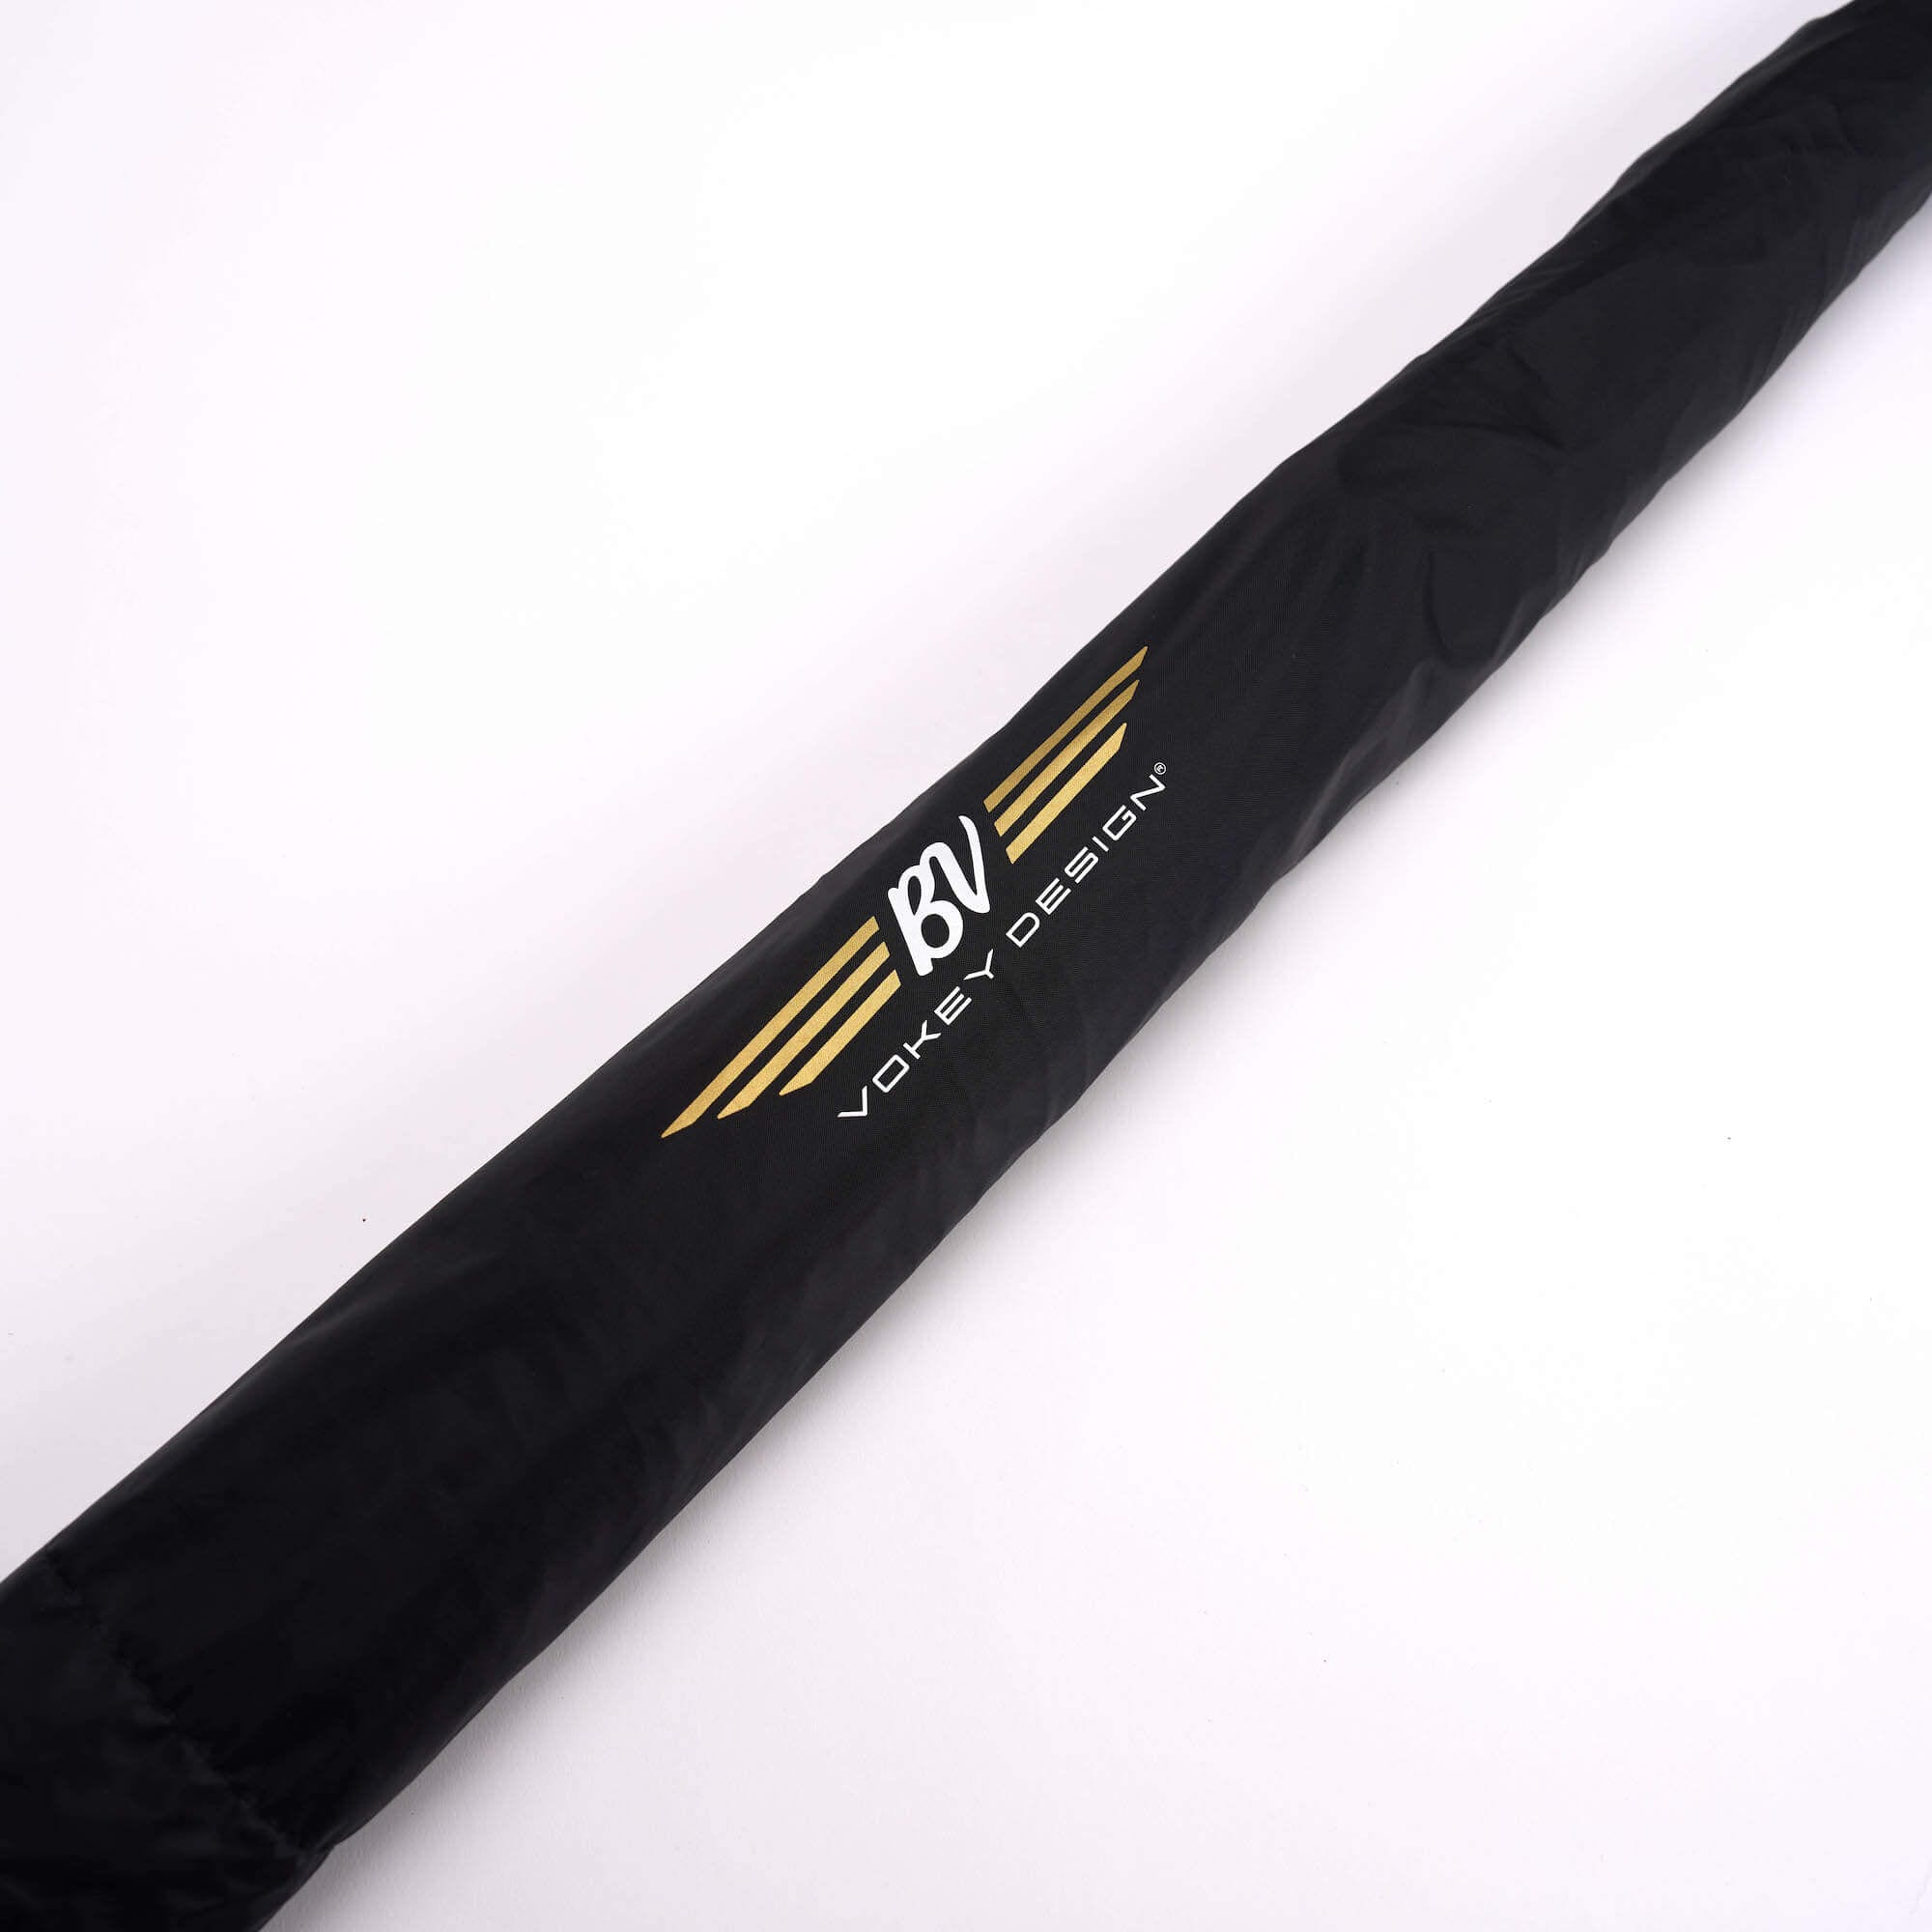 BV Wings Tour Double Canopy Umbrella